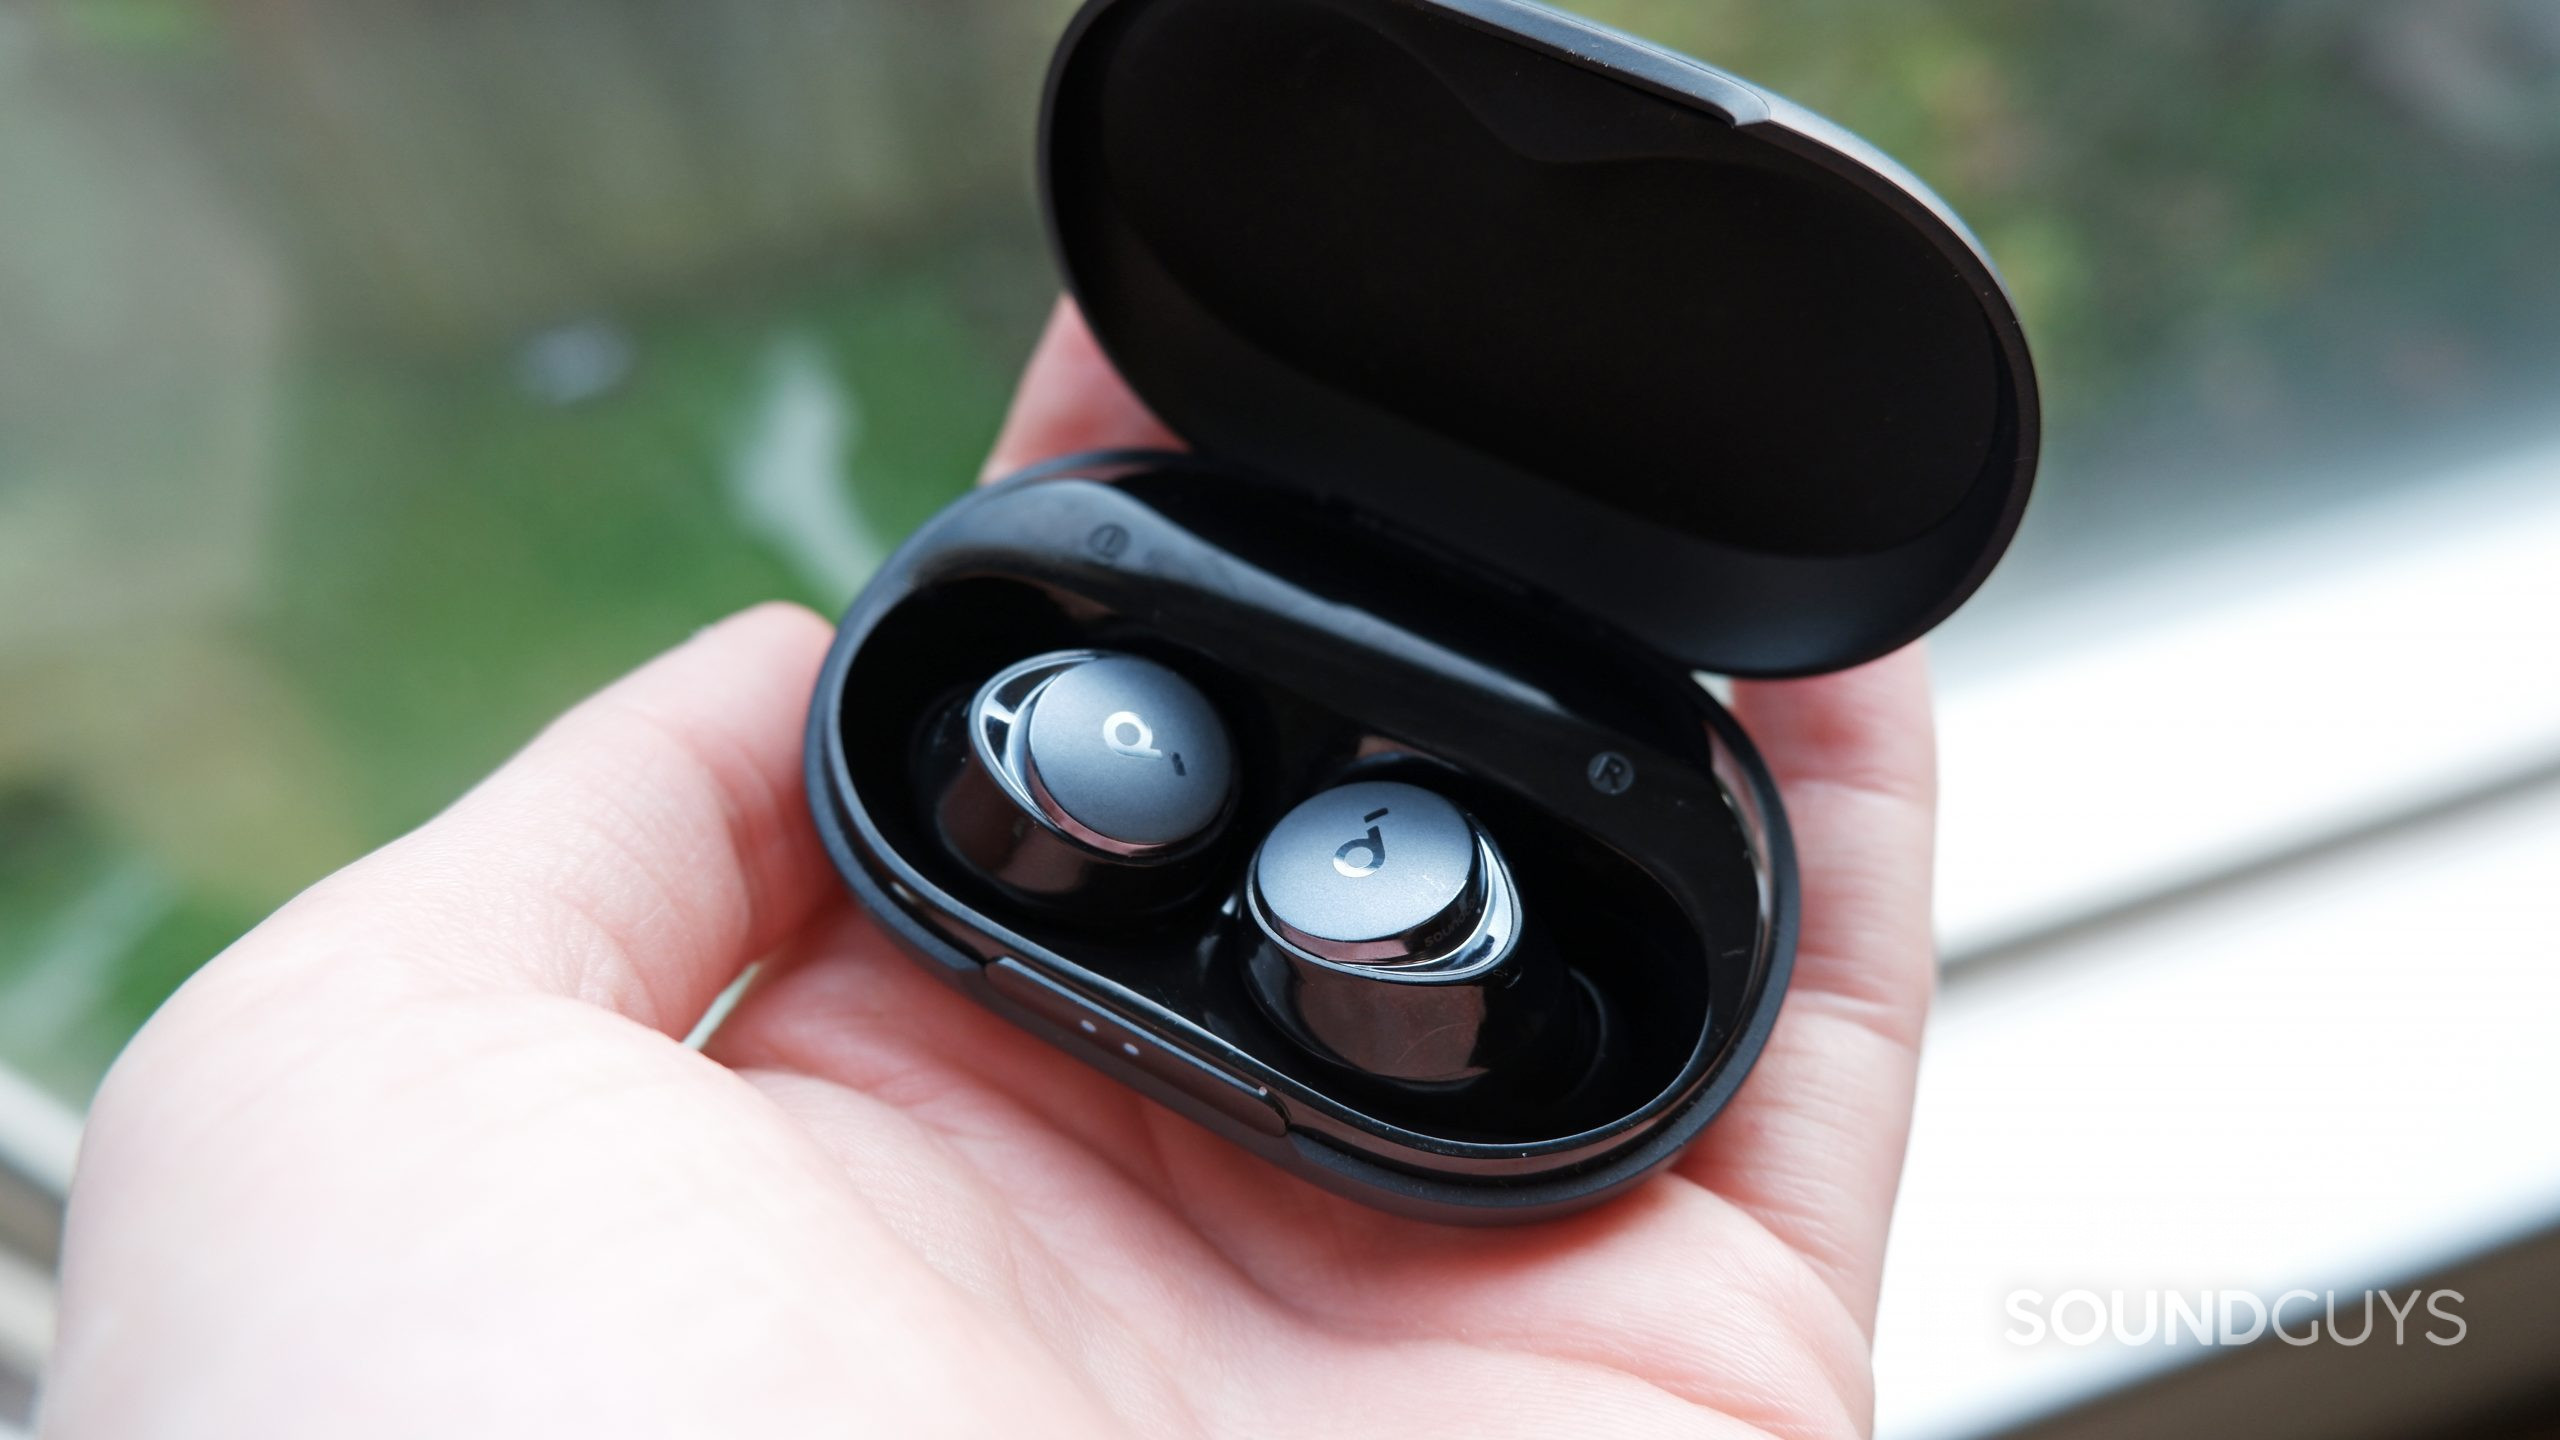 The Anker Soundcore Space A40's case open with the earbuds inside, resting on a person's hand.